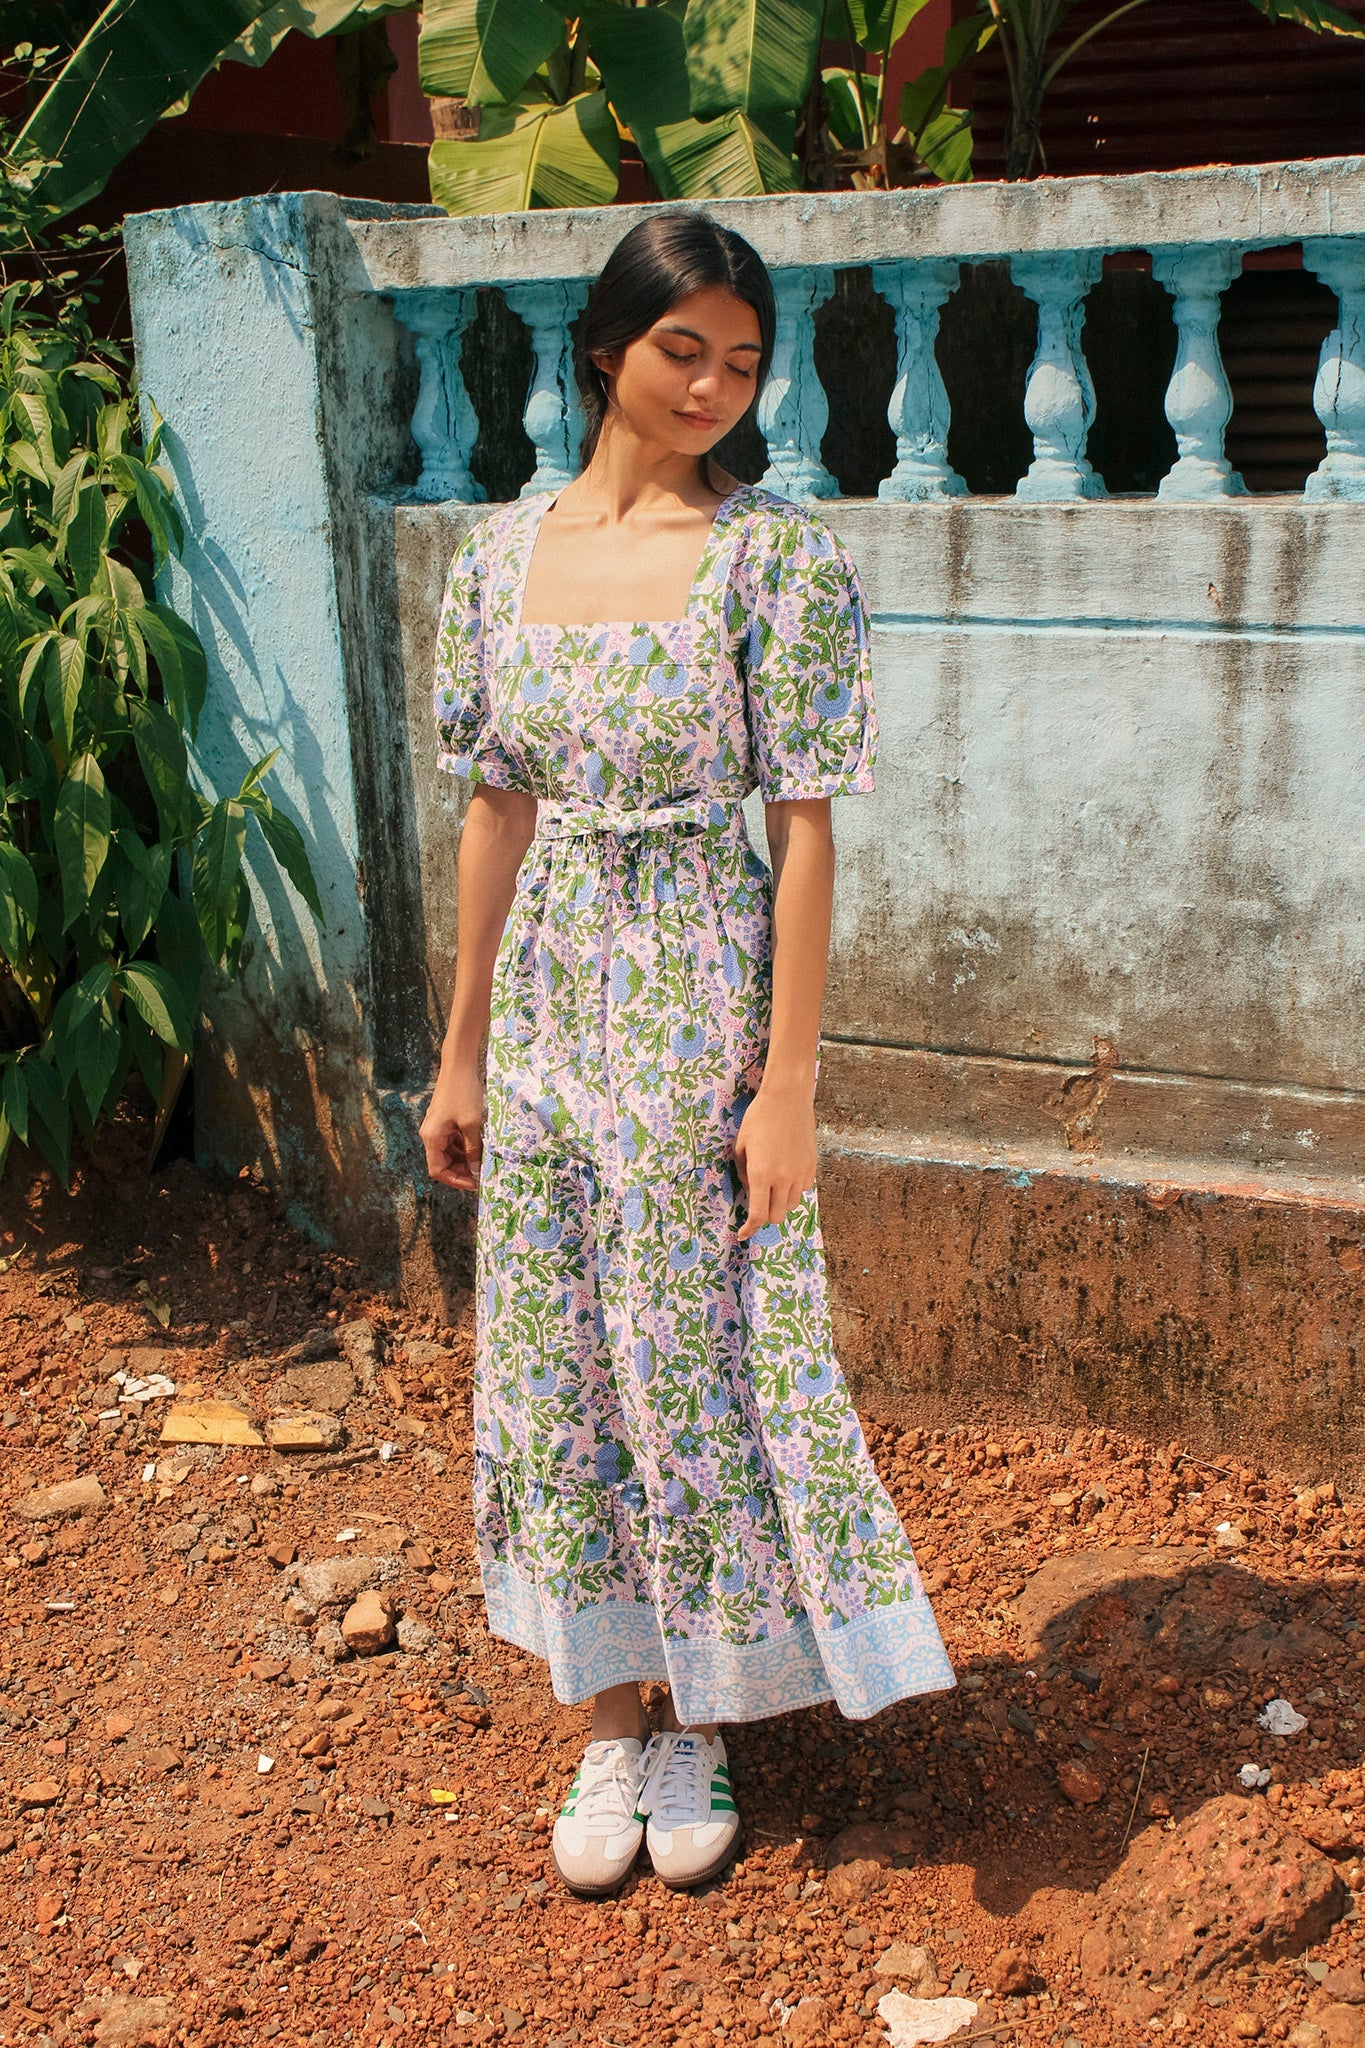 A woman in a Divya Dress - Cornflower Blue by SZ Blockprints and white sneakers stands in front of a weathered blue wall and greenery. She has a contemplative expression and is looking downwards.